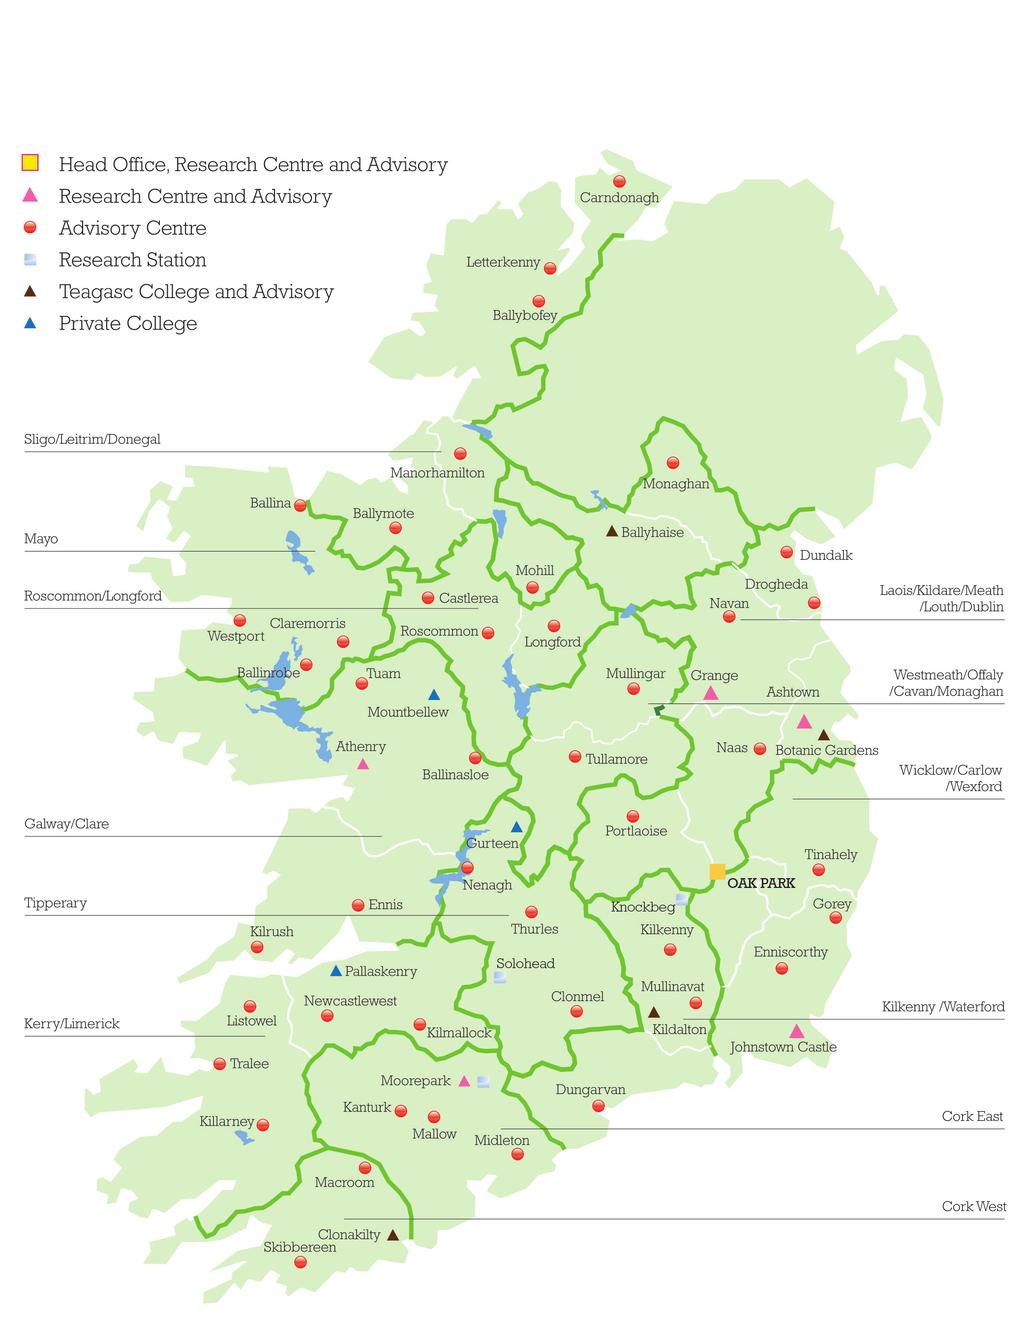 Teagasc has research centres, colleges and advisory offices located around the country, as outlined in the map below.